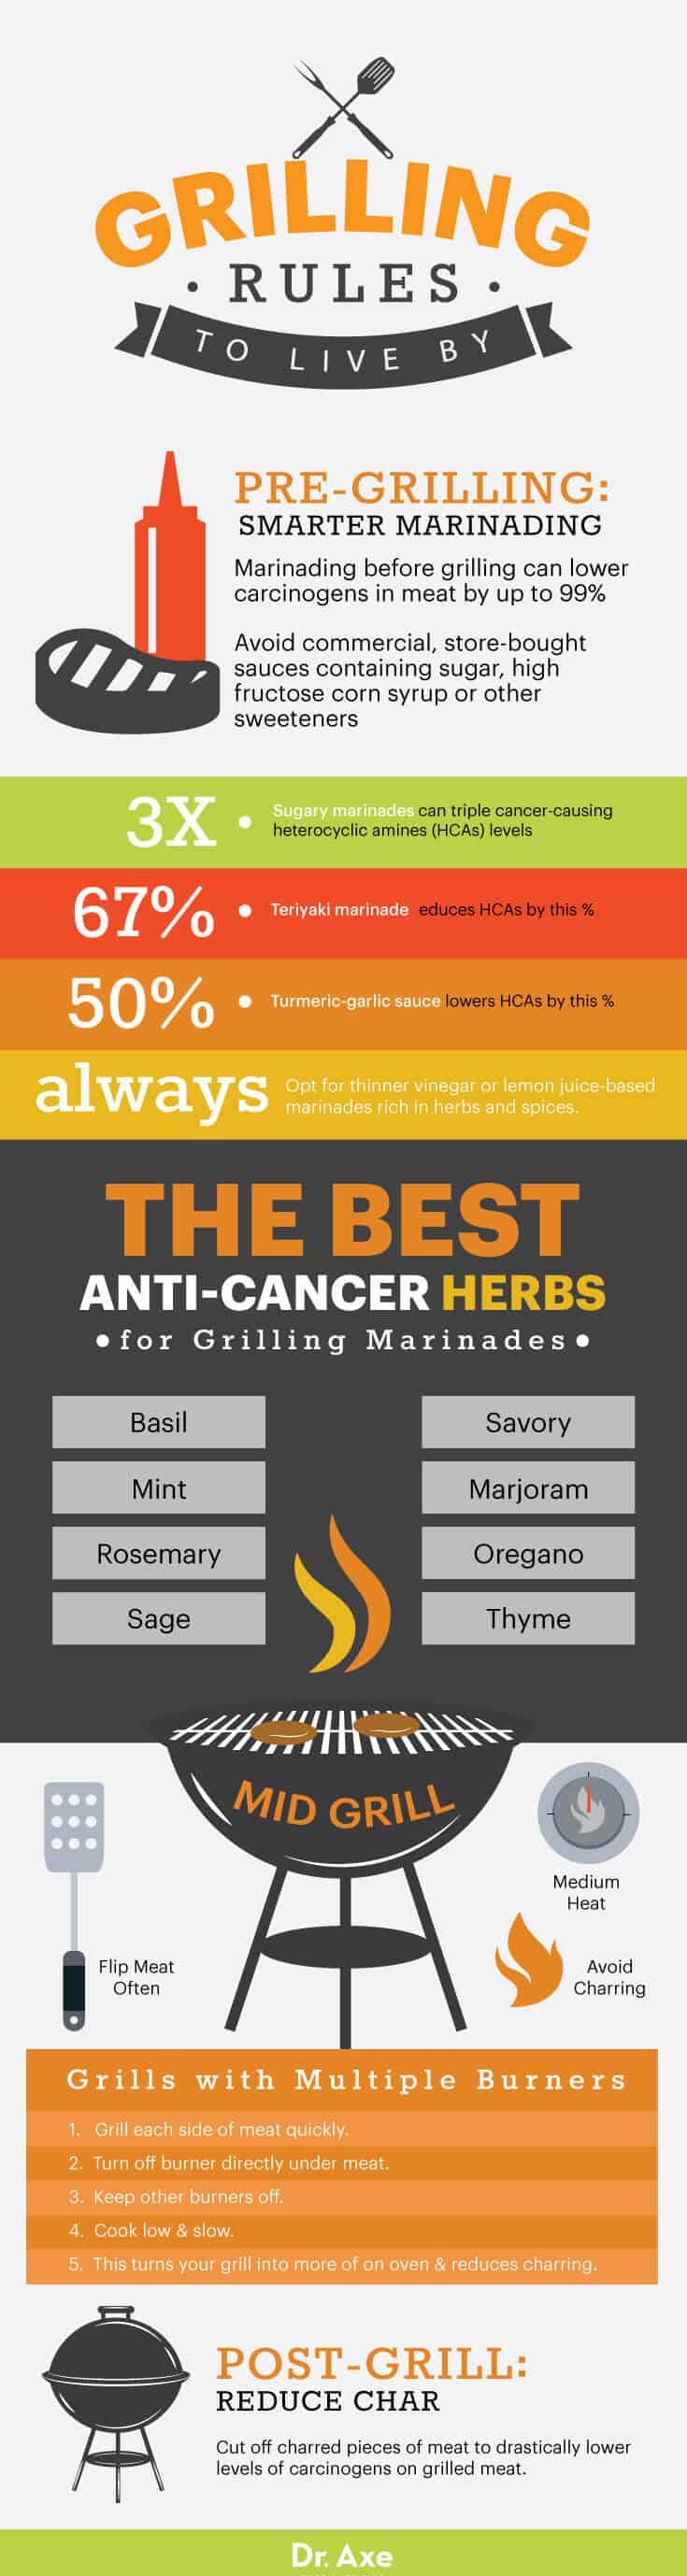 grilling carcinogens - dr. axe